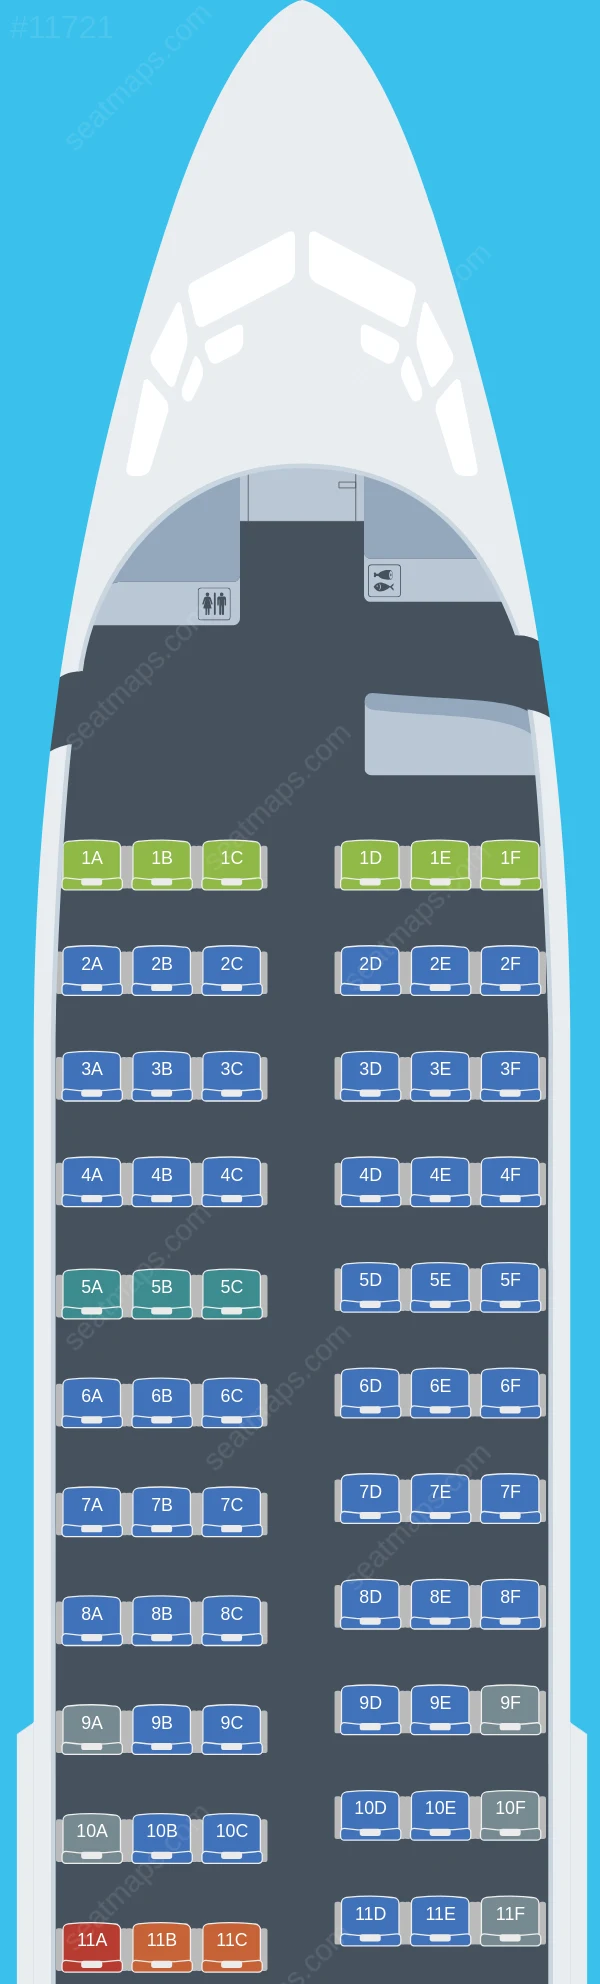 SkyUp MT Boeing 737-700 seatmap preview